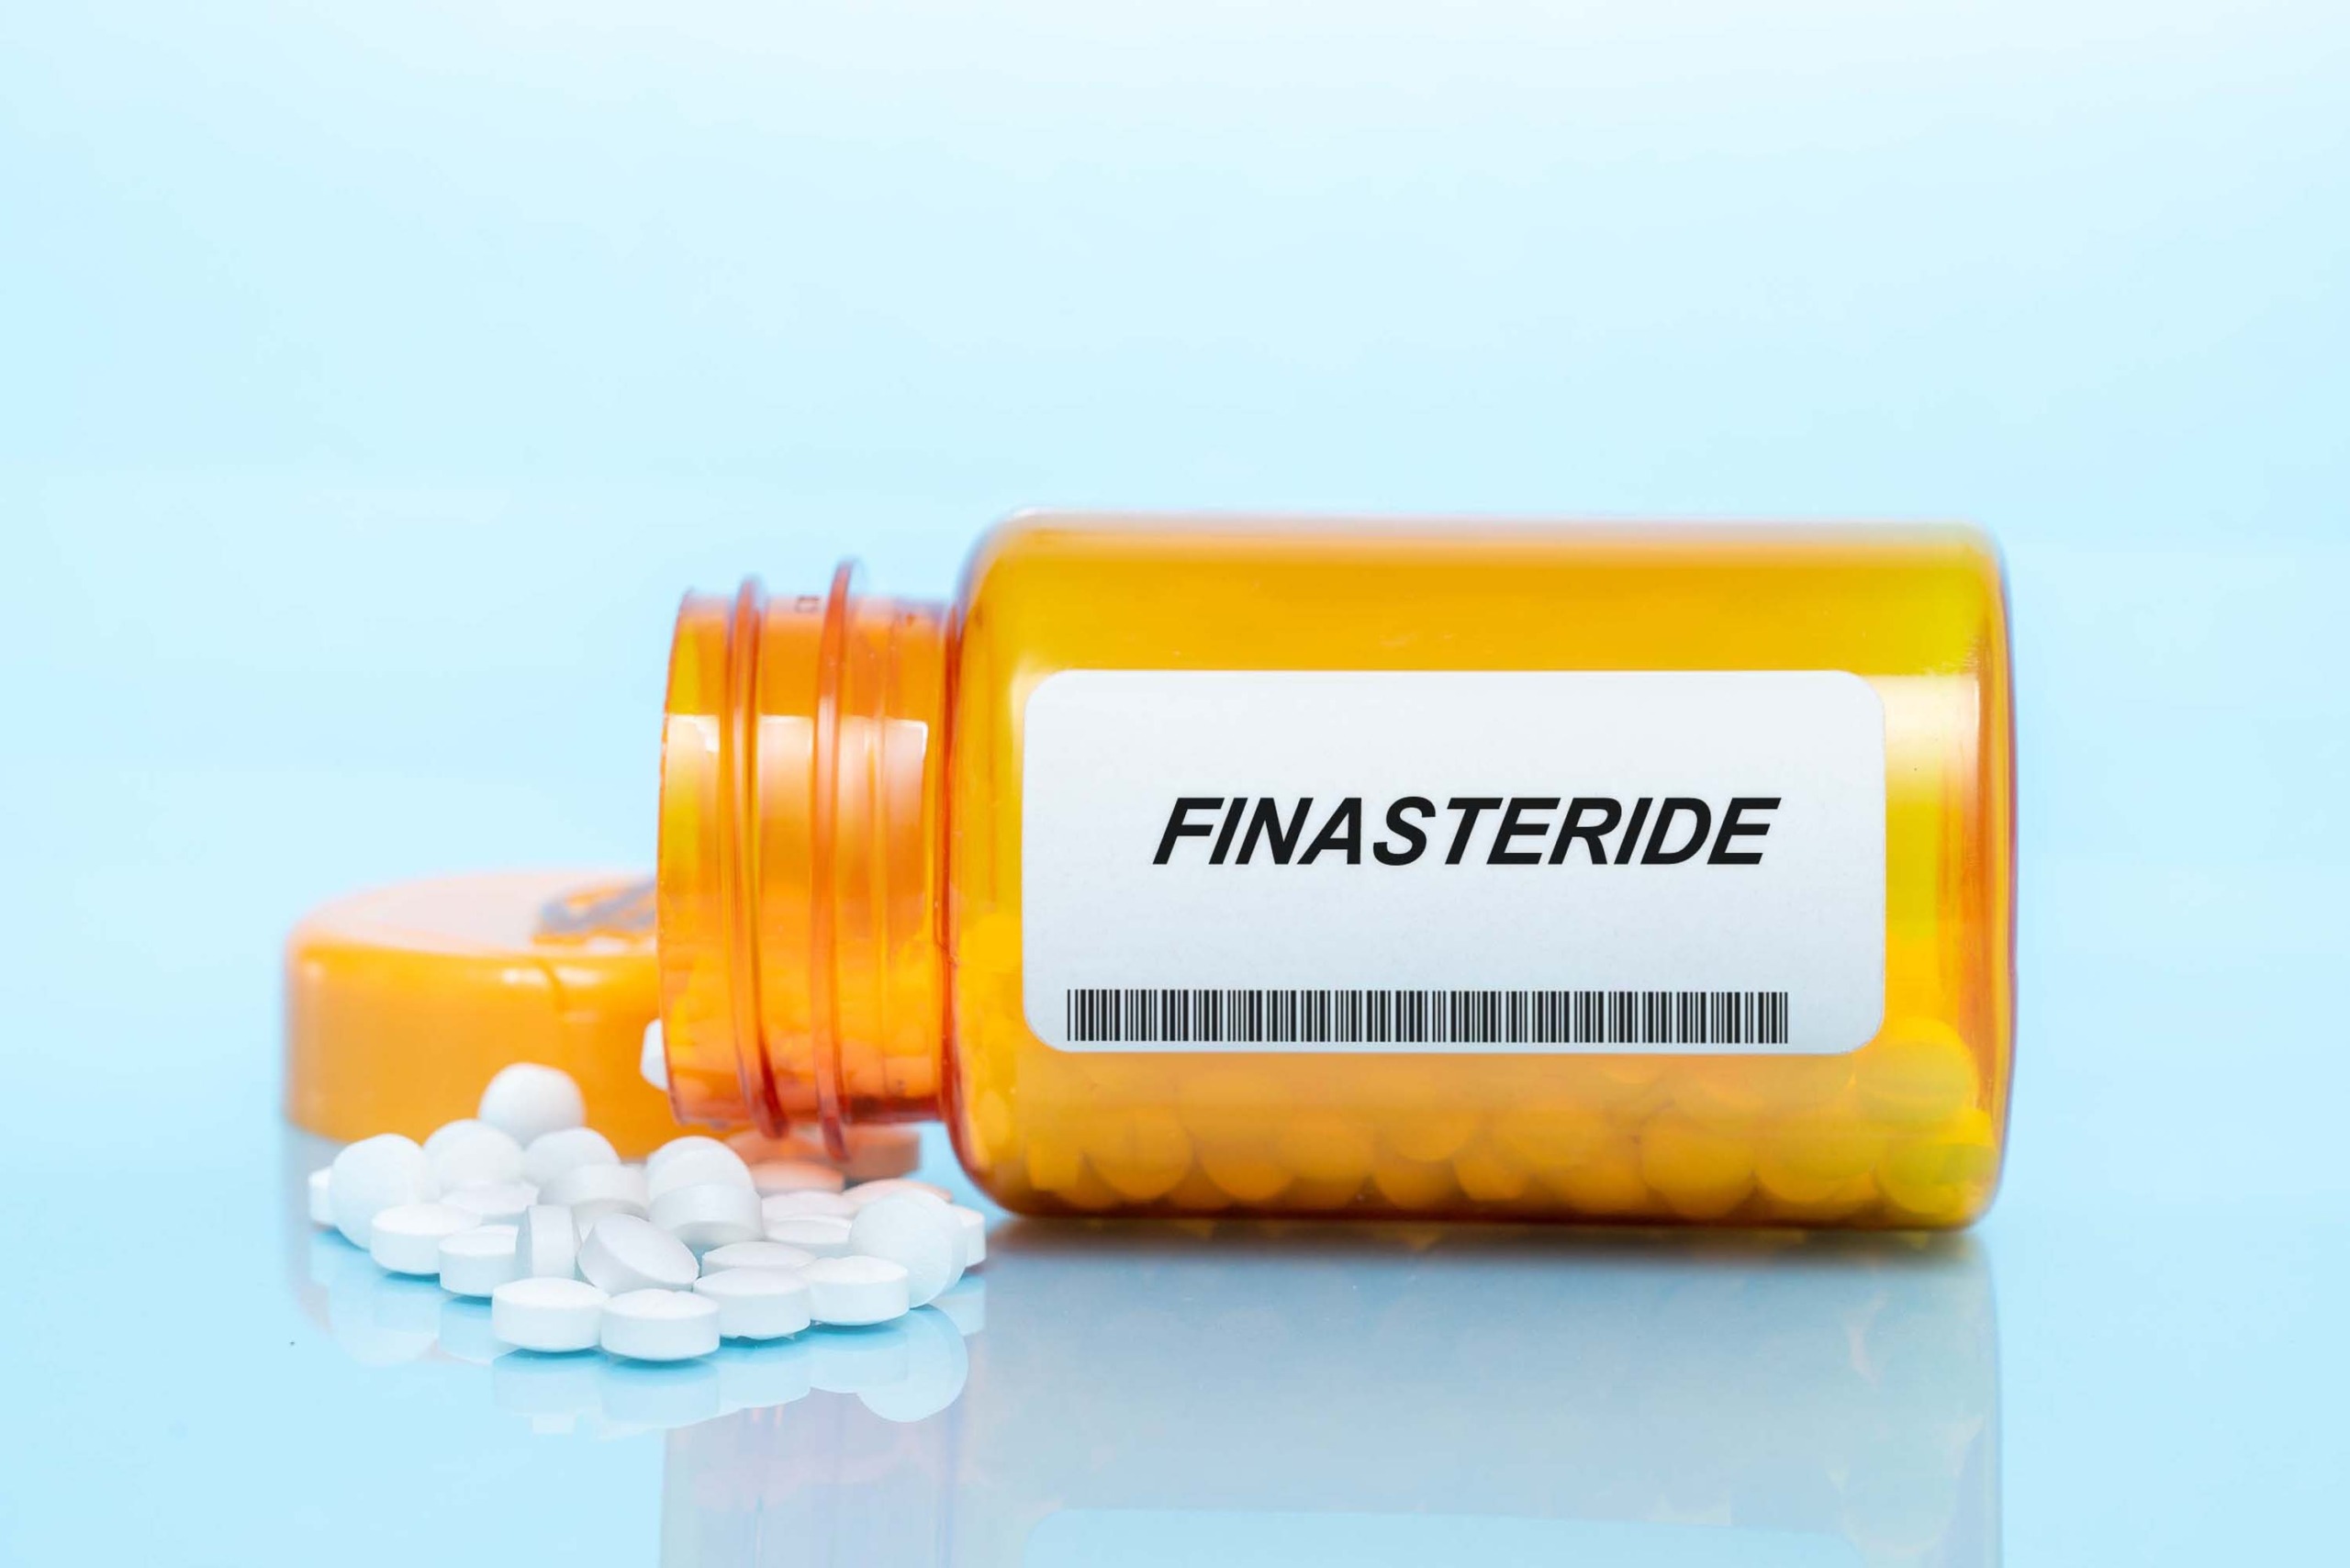 Finasteride pills spilling out of a bottle